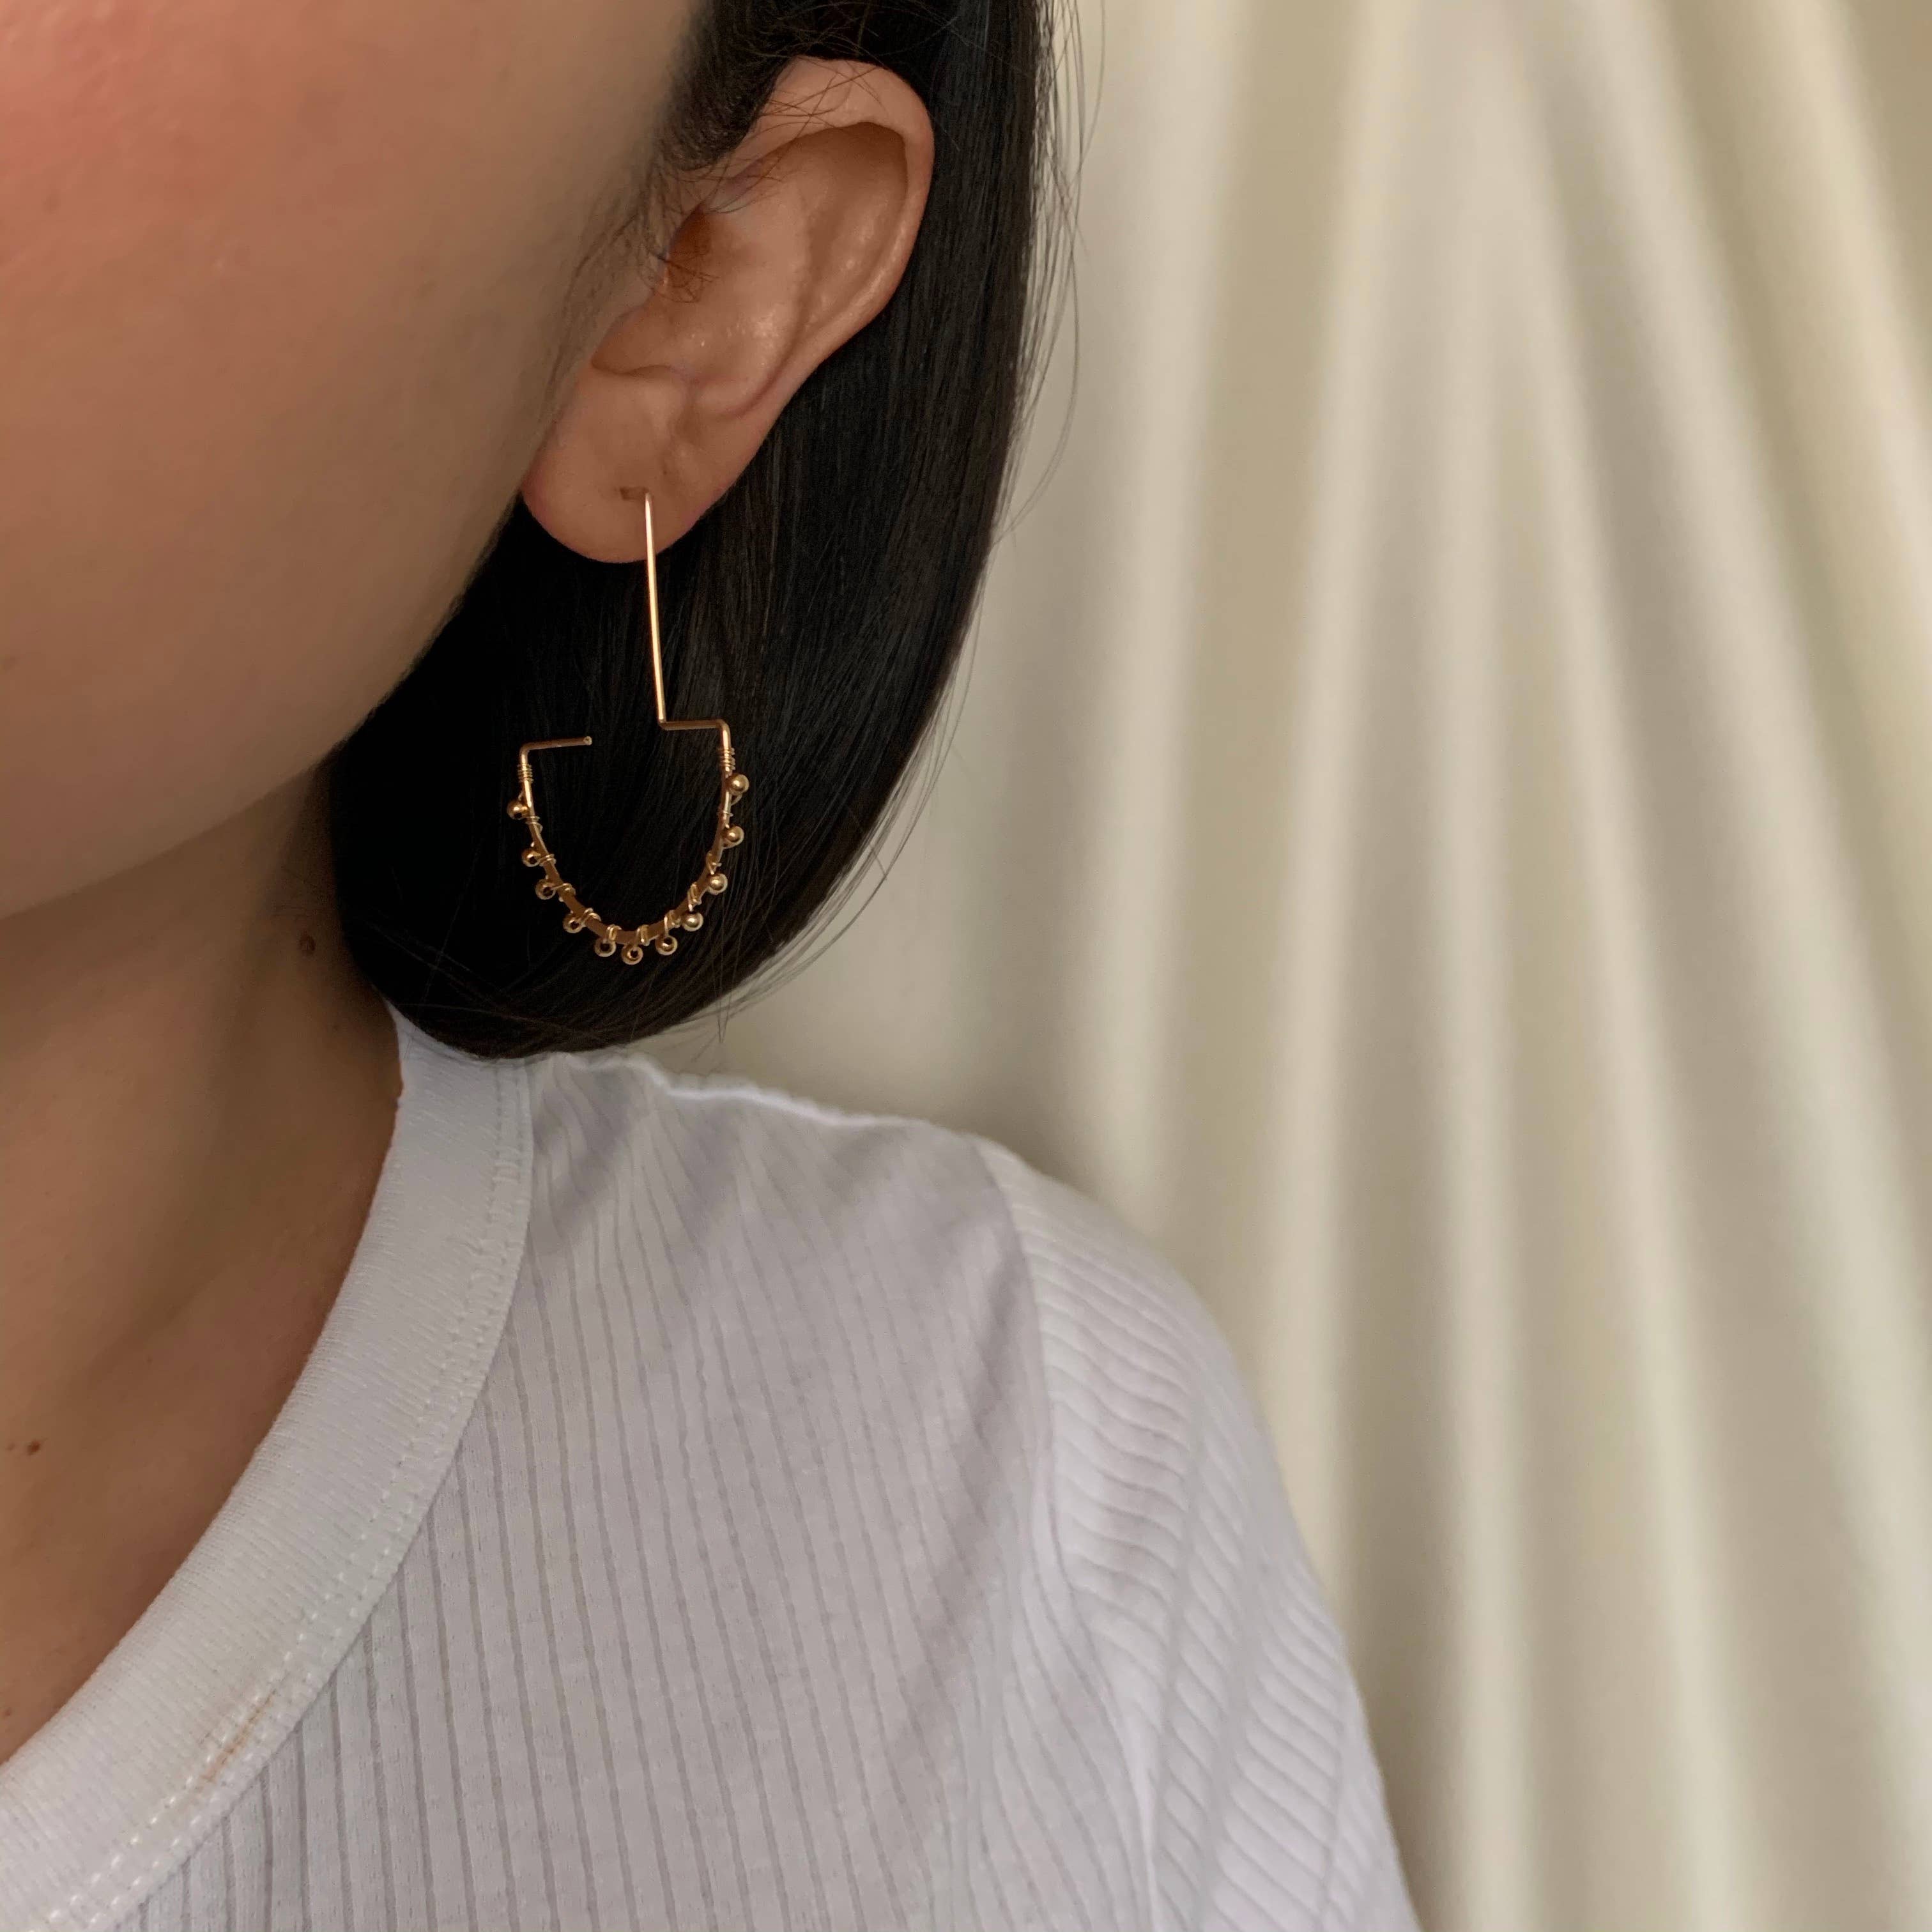 The Cognac Decanter Earrings by Points Jewelry